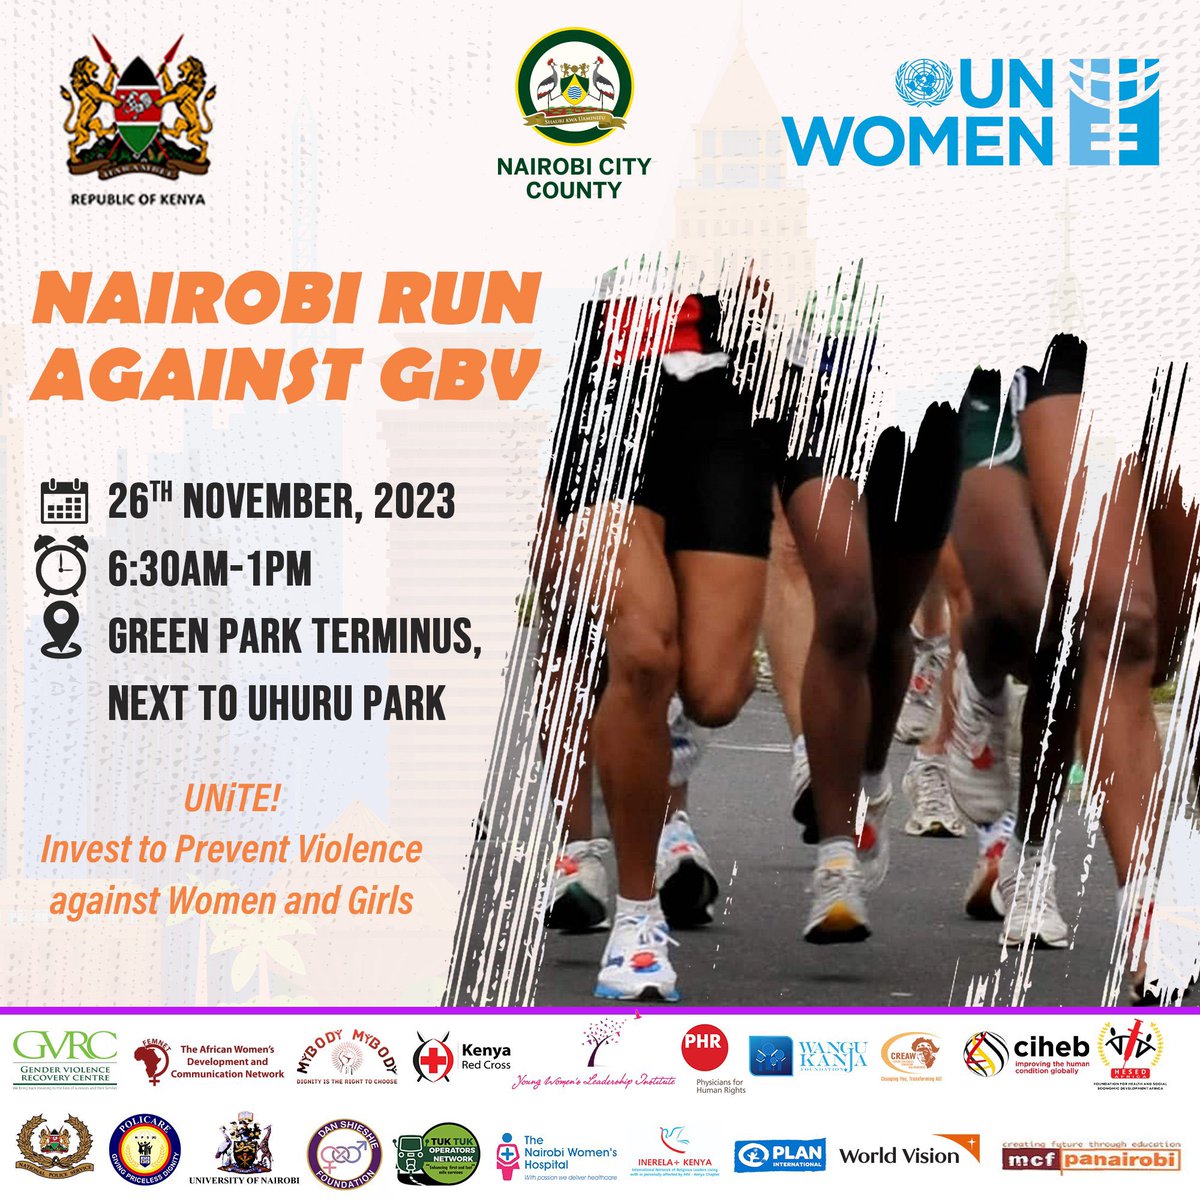 Come and participate in the Nairobi Run Against Sexual and Gender-Based Violence.

Date: 26th November, 6:30 
Time 6:30 AM-1:00 pm.
Meeting Point: Green Park Terminus, Next to Uhuru Park.

#NairobiRunAgainstGBV
#NoExcuses 
#RestoringDignity 
#16DaysOfActivism